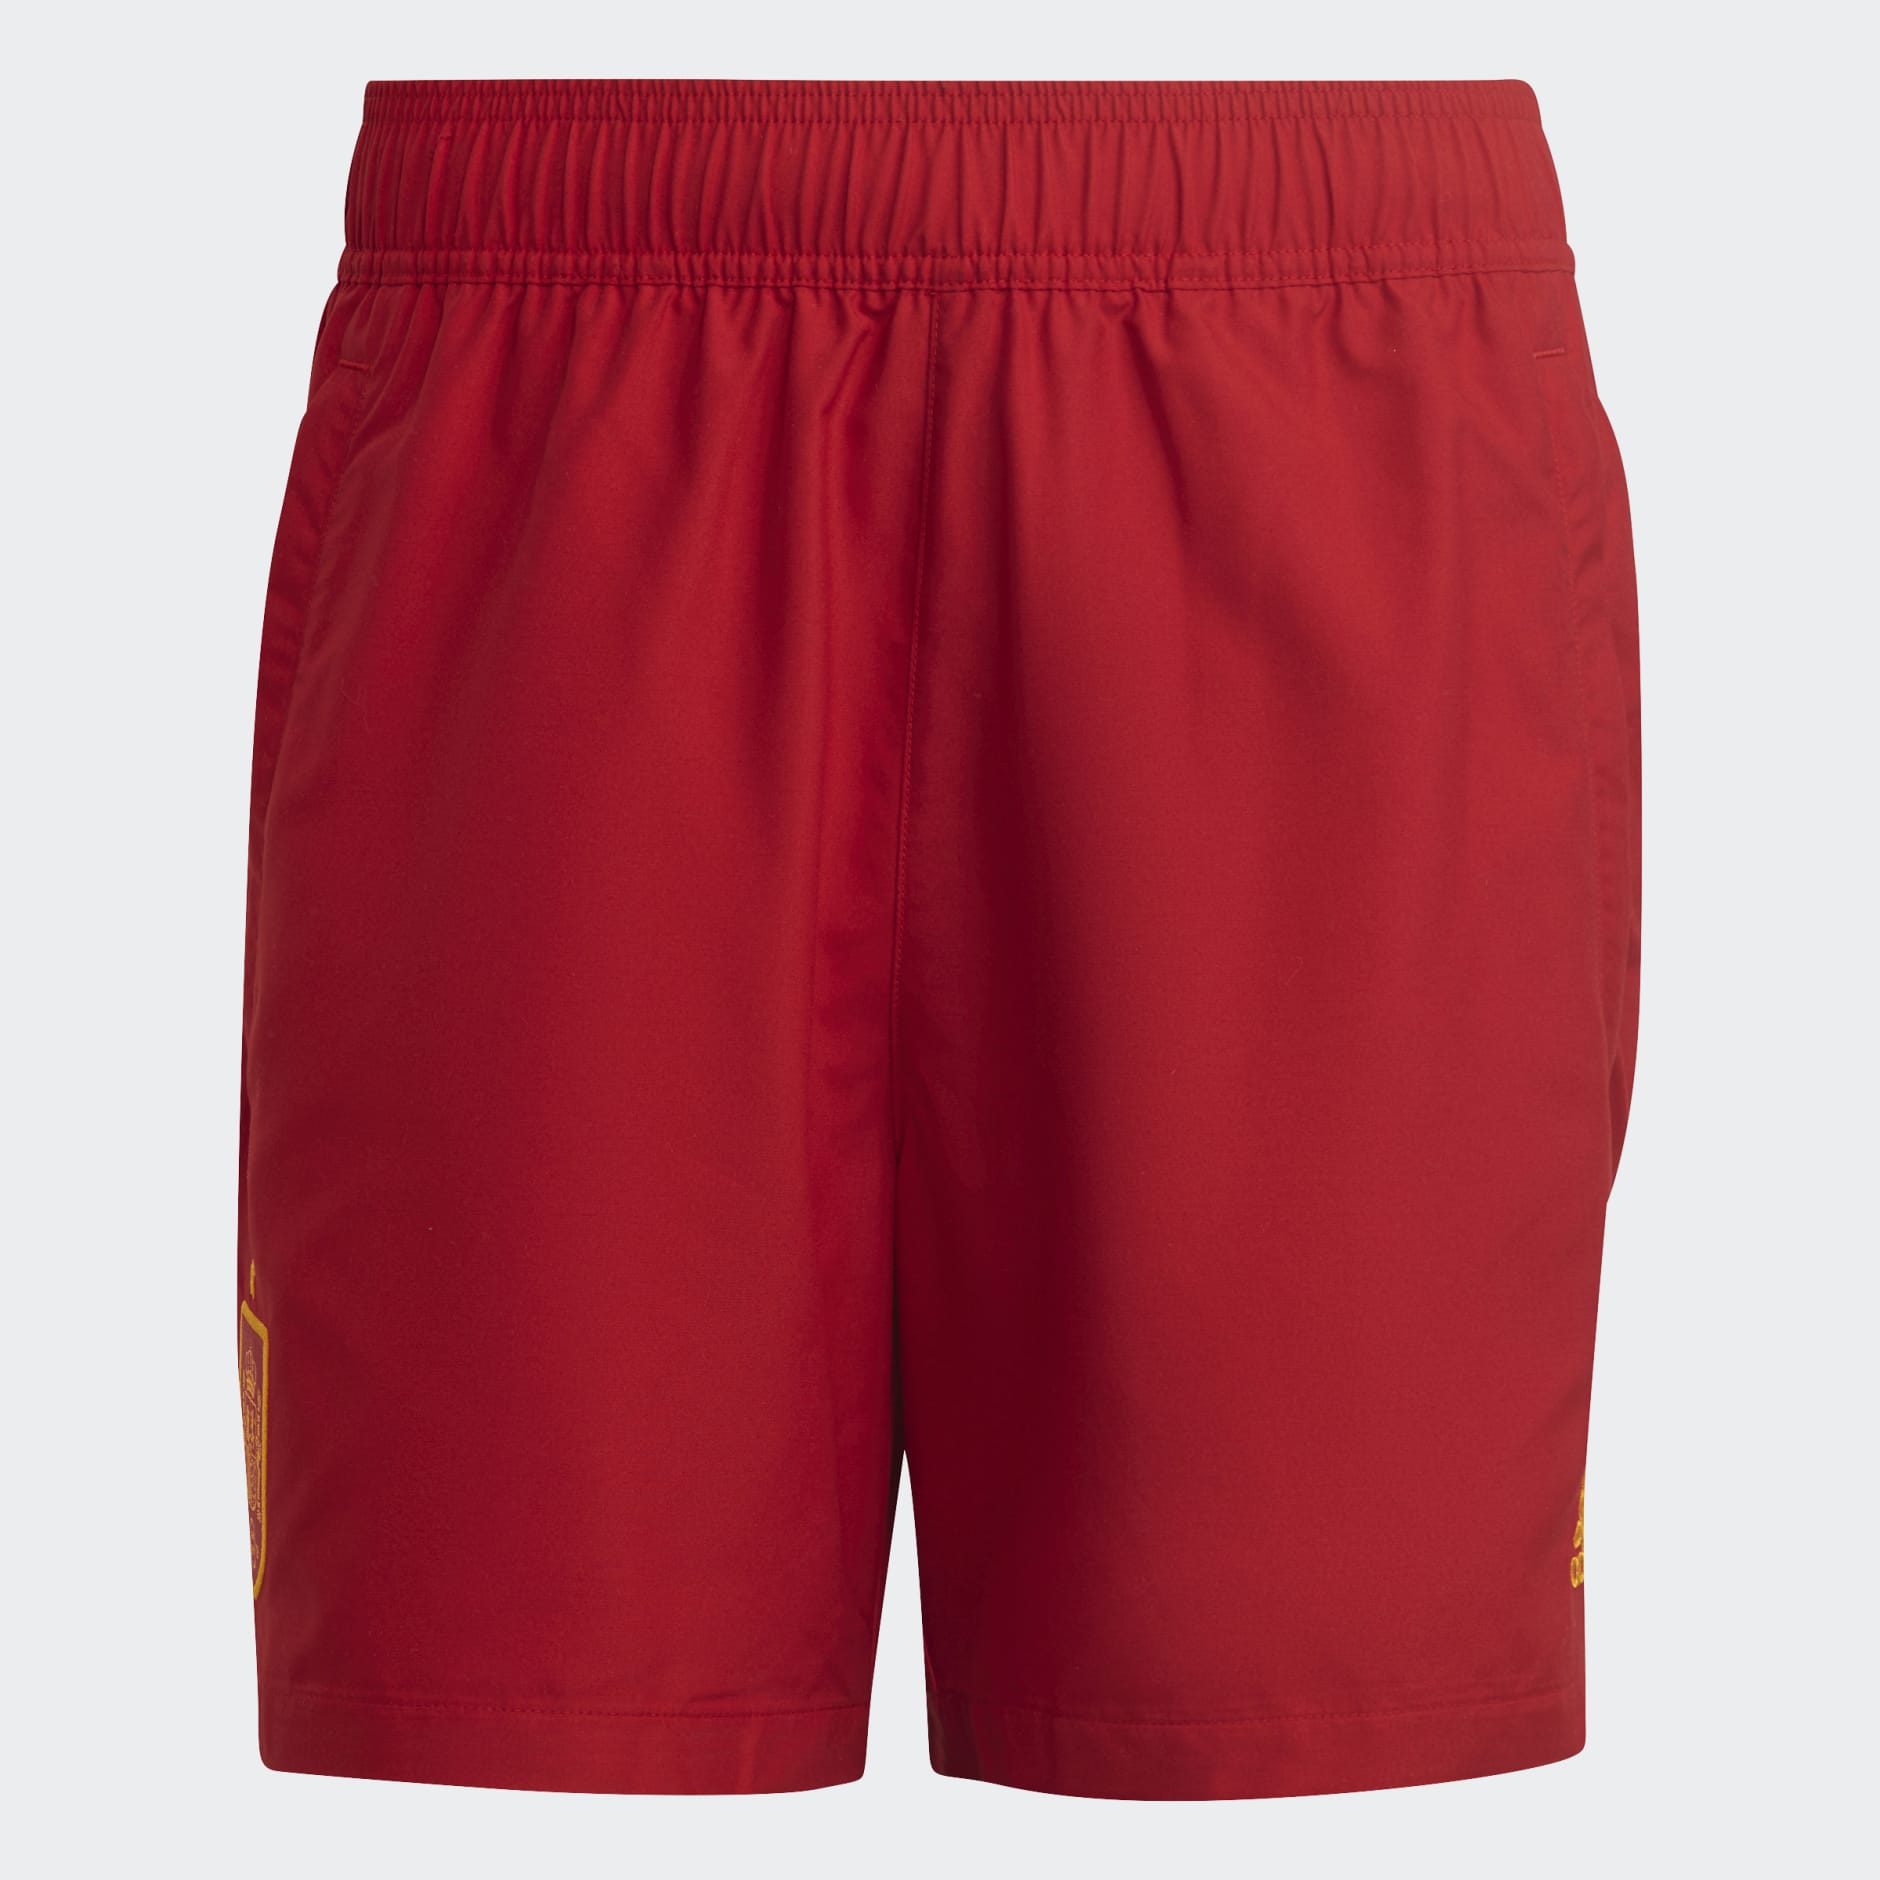 Men's Clothing - Spain Woven Shorts - Red | adidas Kuwait